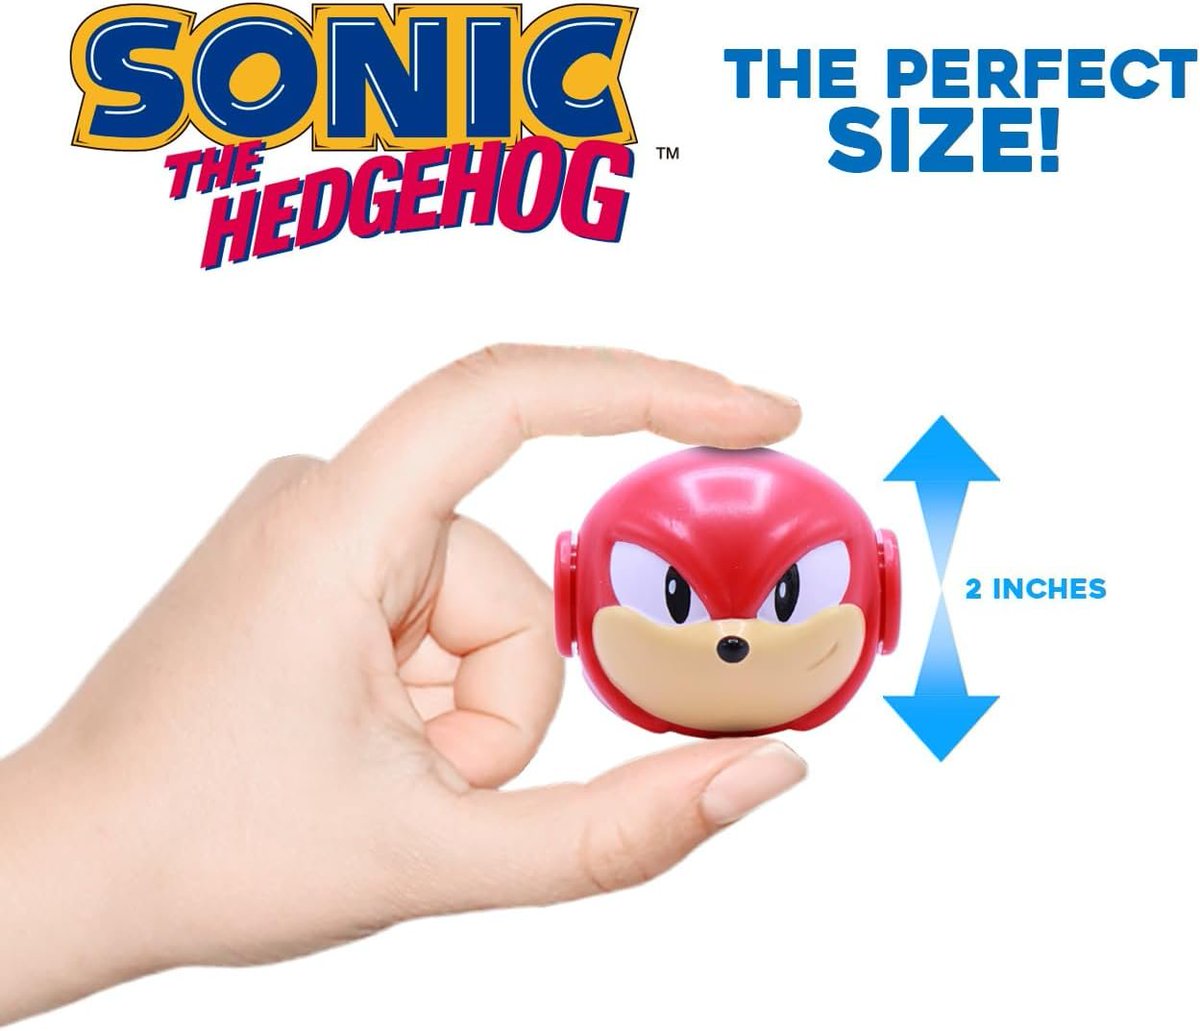 Sonic the Hedgehog Fidget Spinners on Amazon ($12.99 each)

amzn.to/3JS9pWZ

Comes in Sonic, Tails, Knuckles, and Super Sonic versions

#affiliate